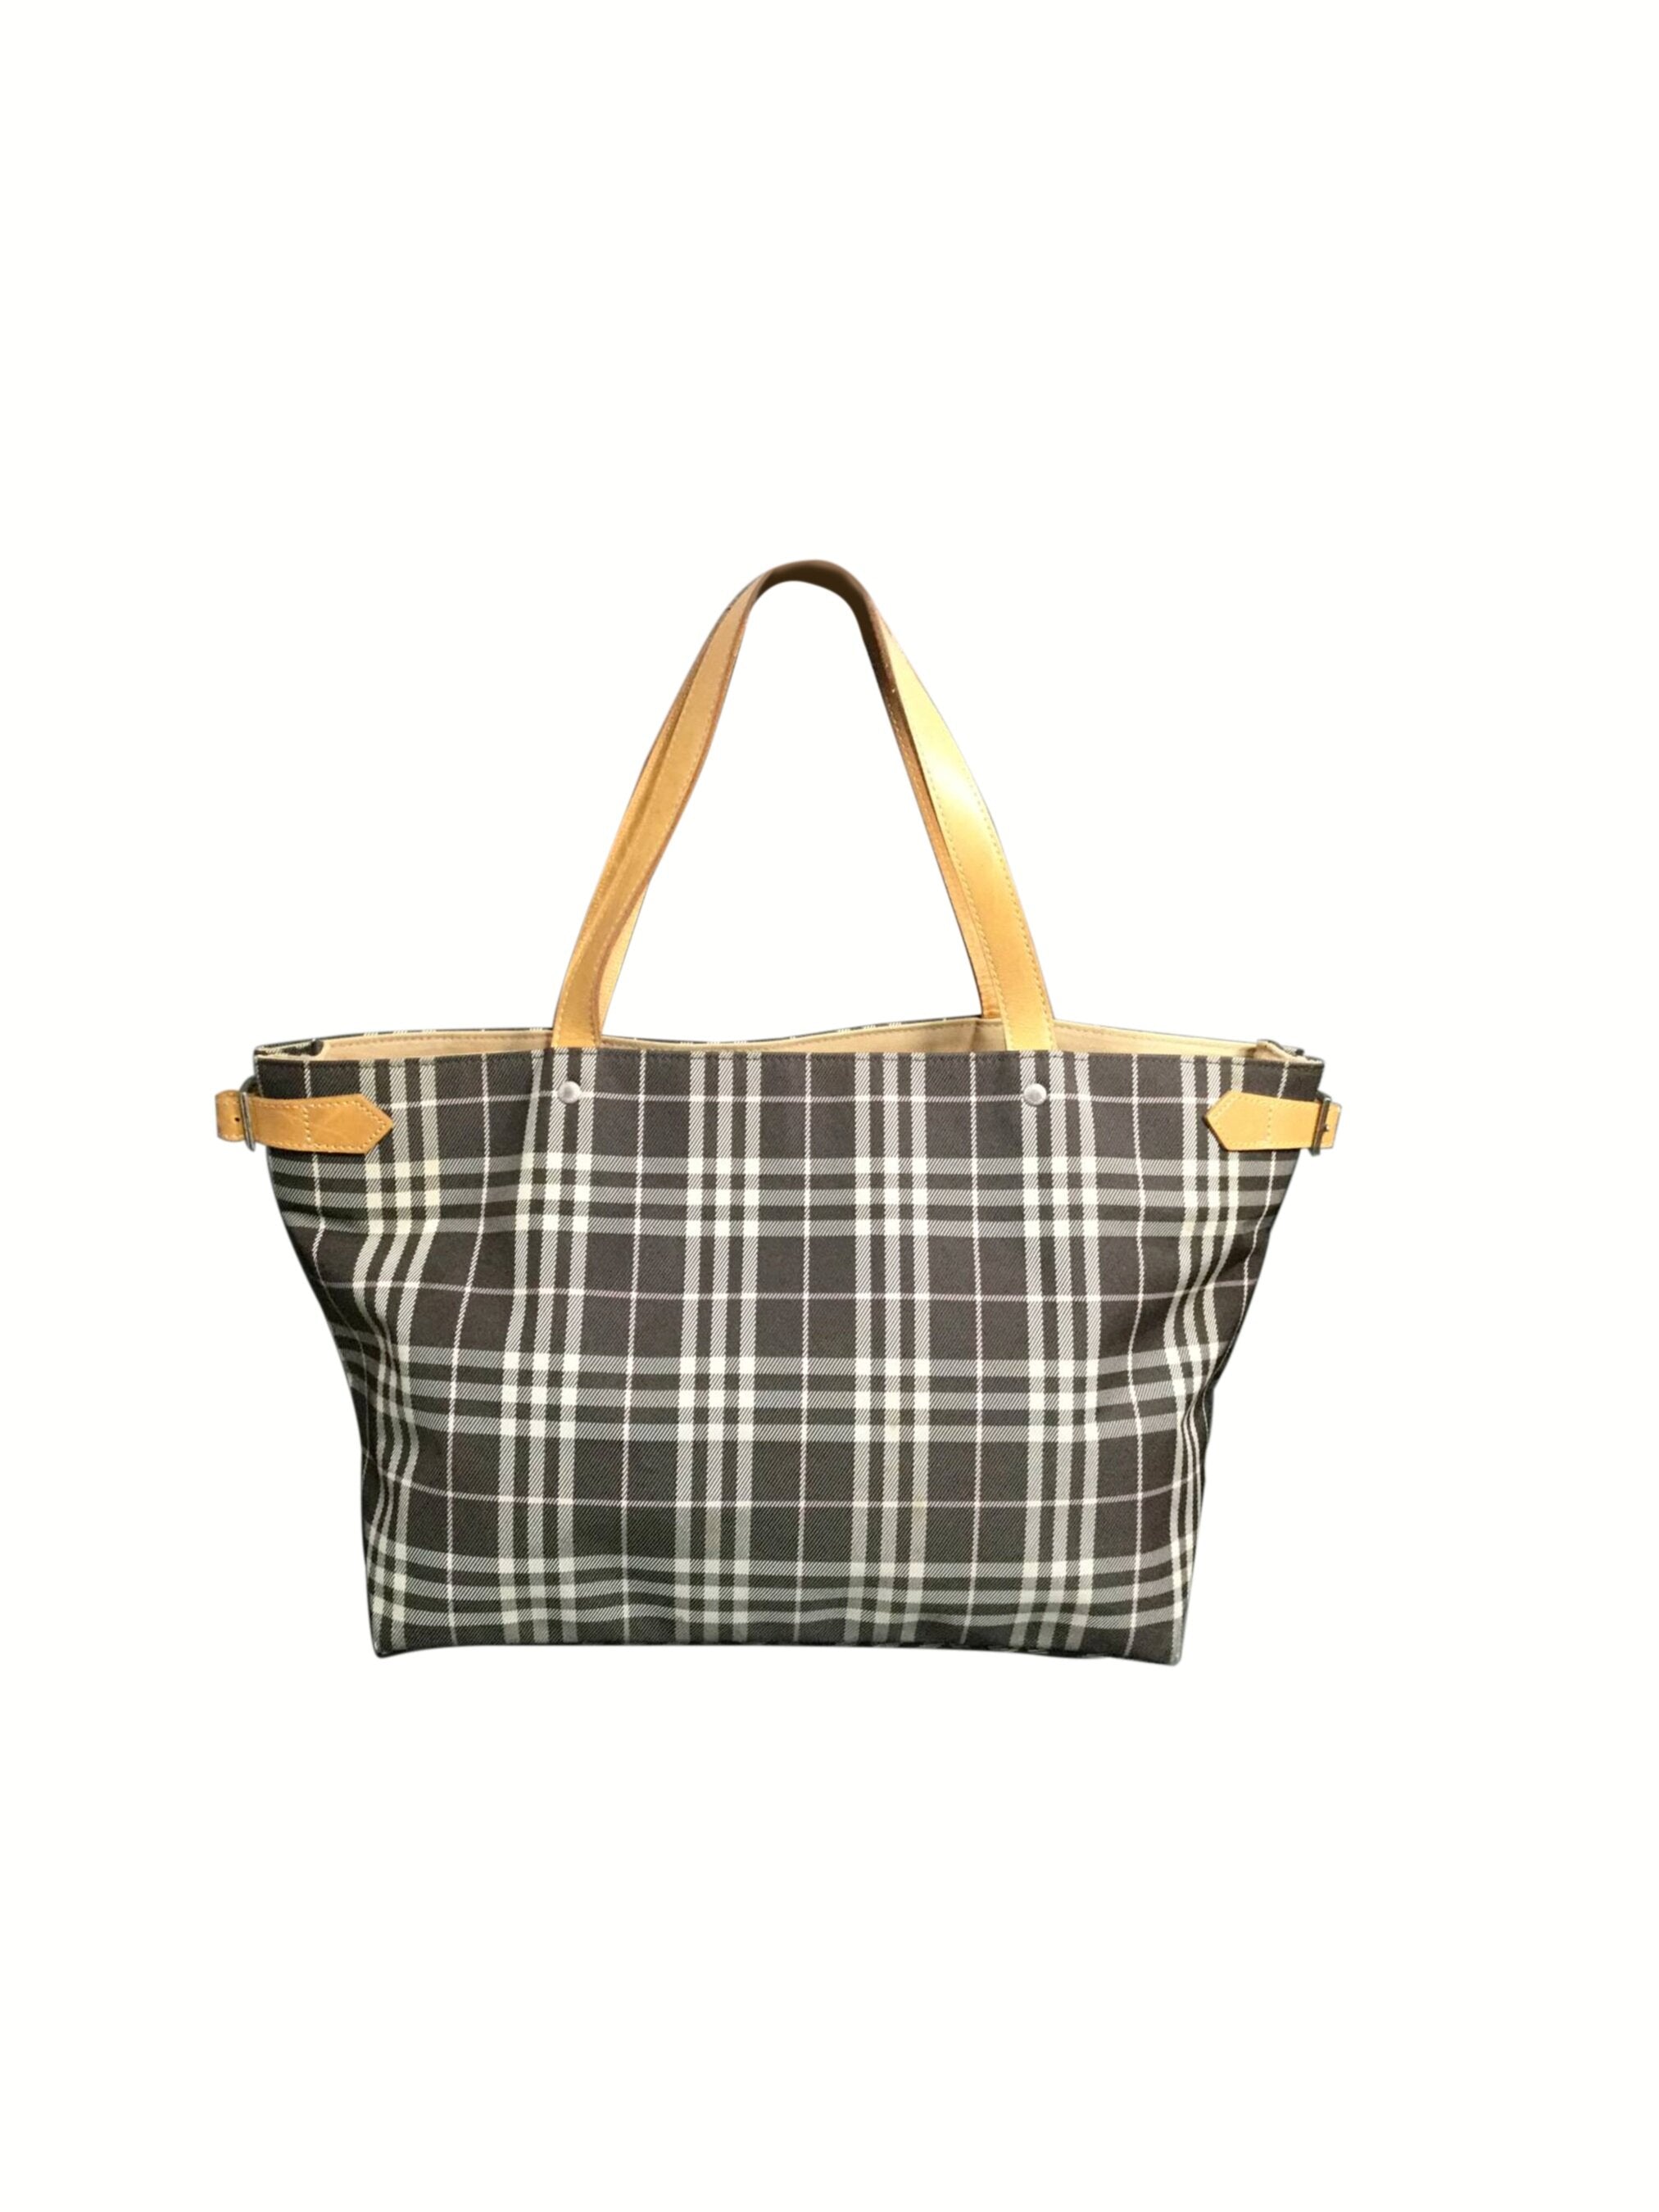 Burberry, Bags, Original Burberry Purse Brown Leather And Plaid